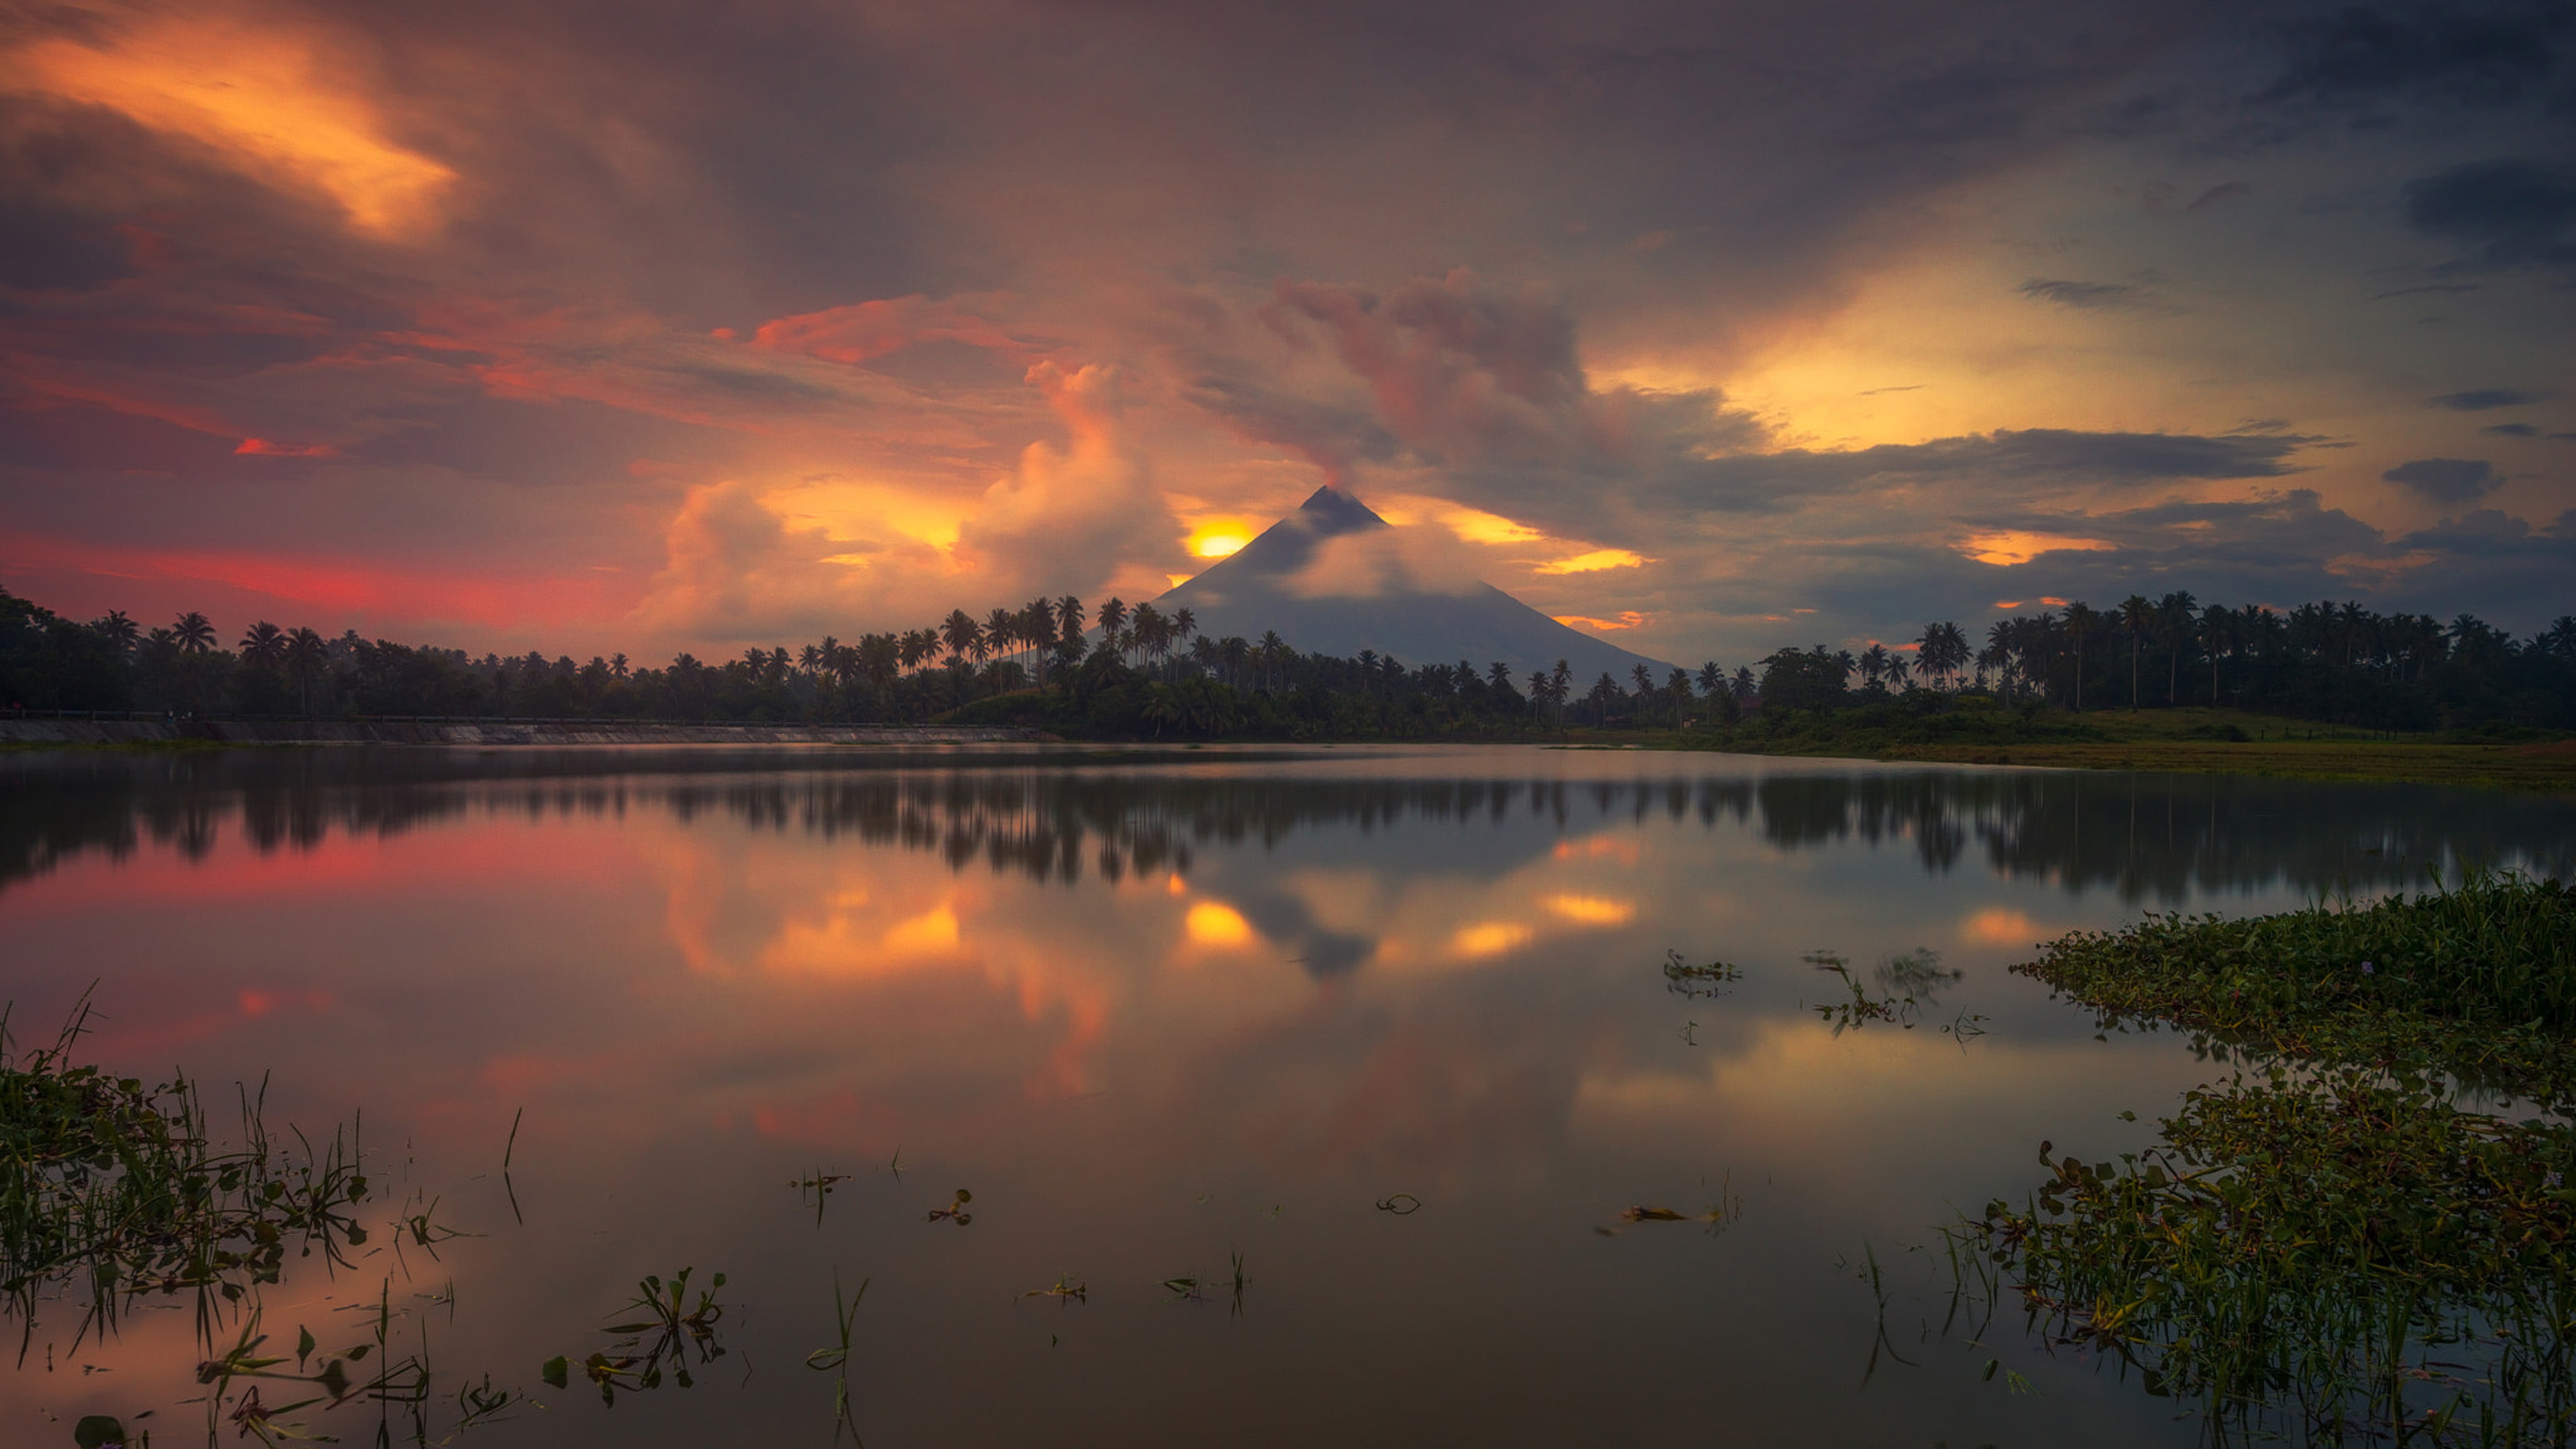 Gabawan Lake In Daraga Albay Philippines Reflection Of Mayon Volcano Ultra Hd Desktop Wallpapers For Computers Laptop Tablet And Mobile Phones 3840×2160